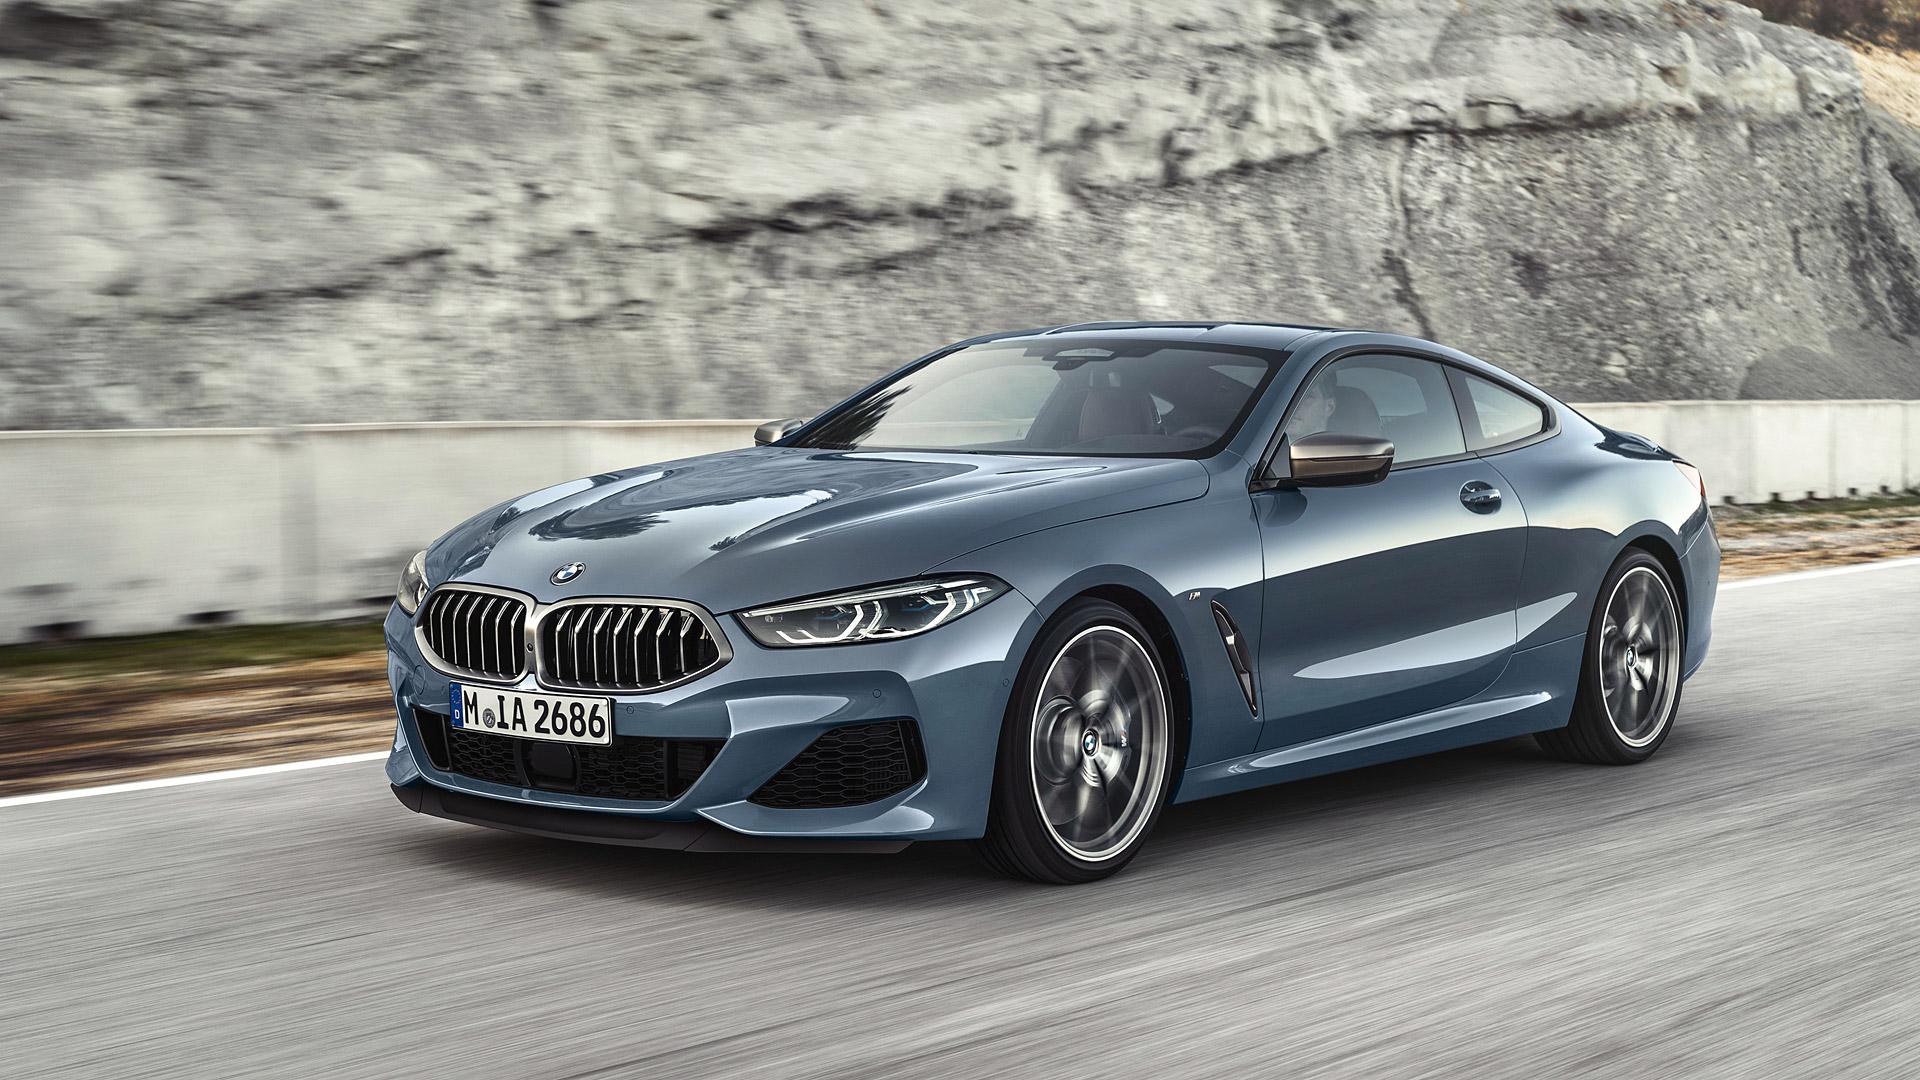 Bmw 8 Series Coupe Picture New Cars HD